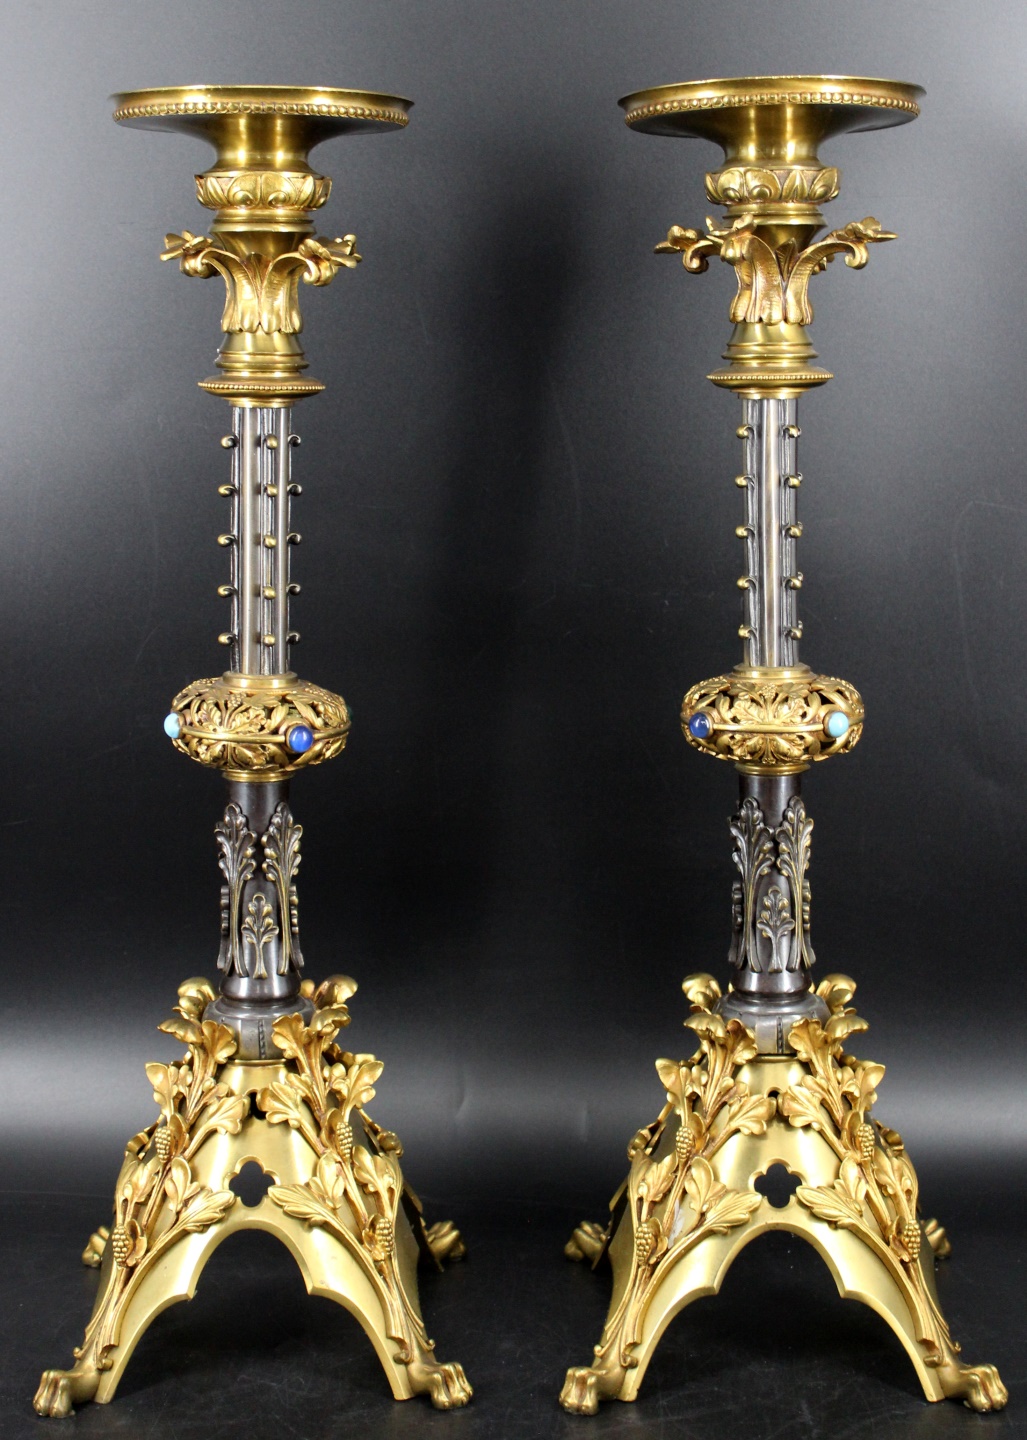 A PAIR OF GILT BRONZE & JEWELED